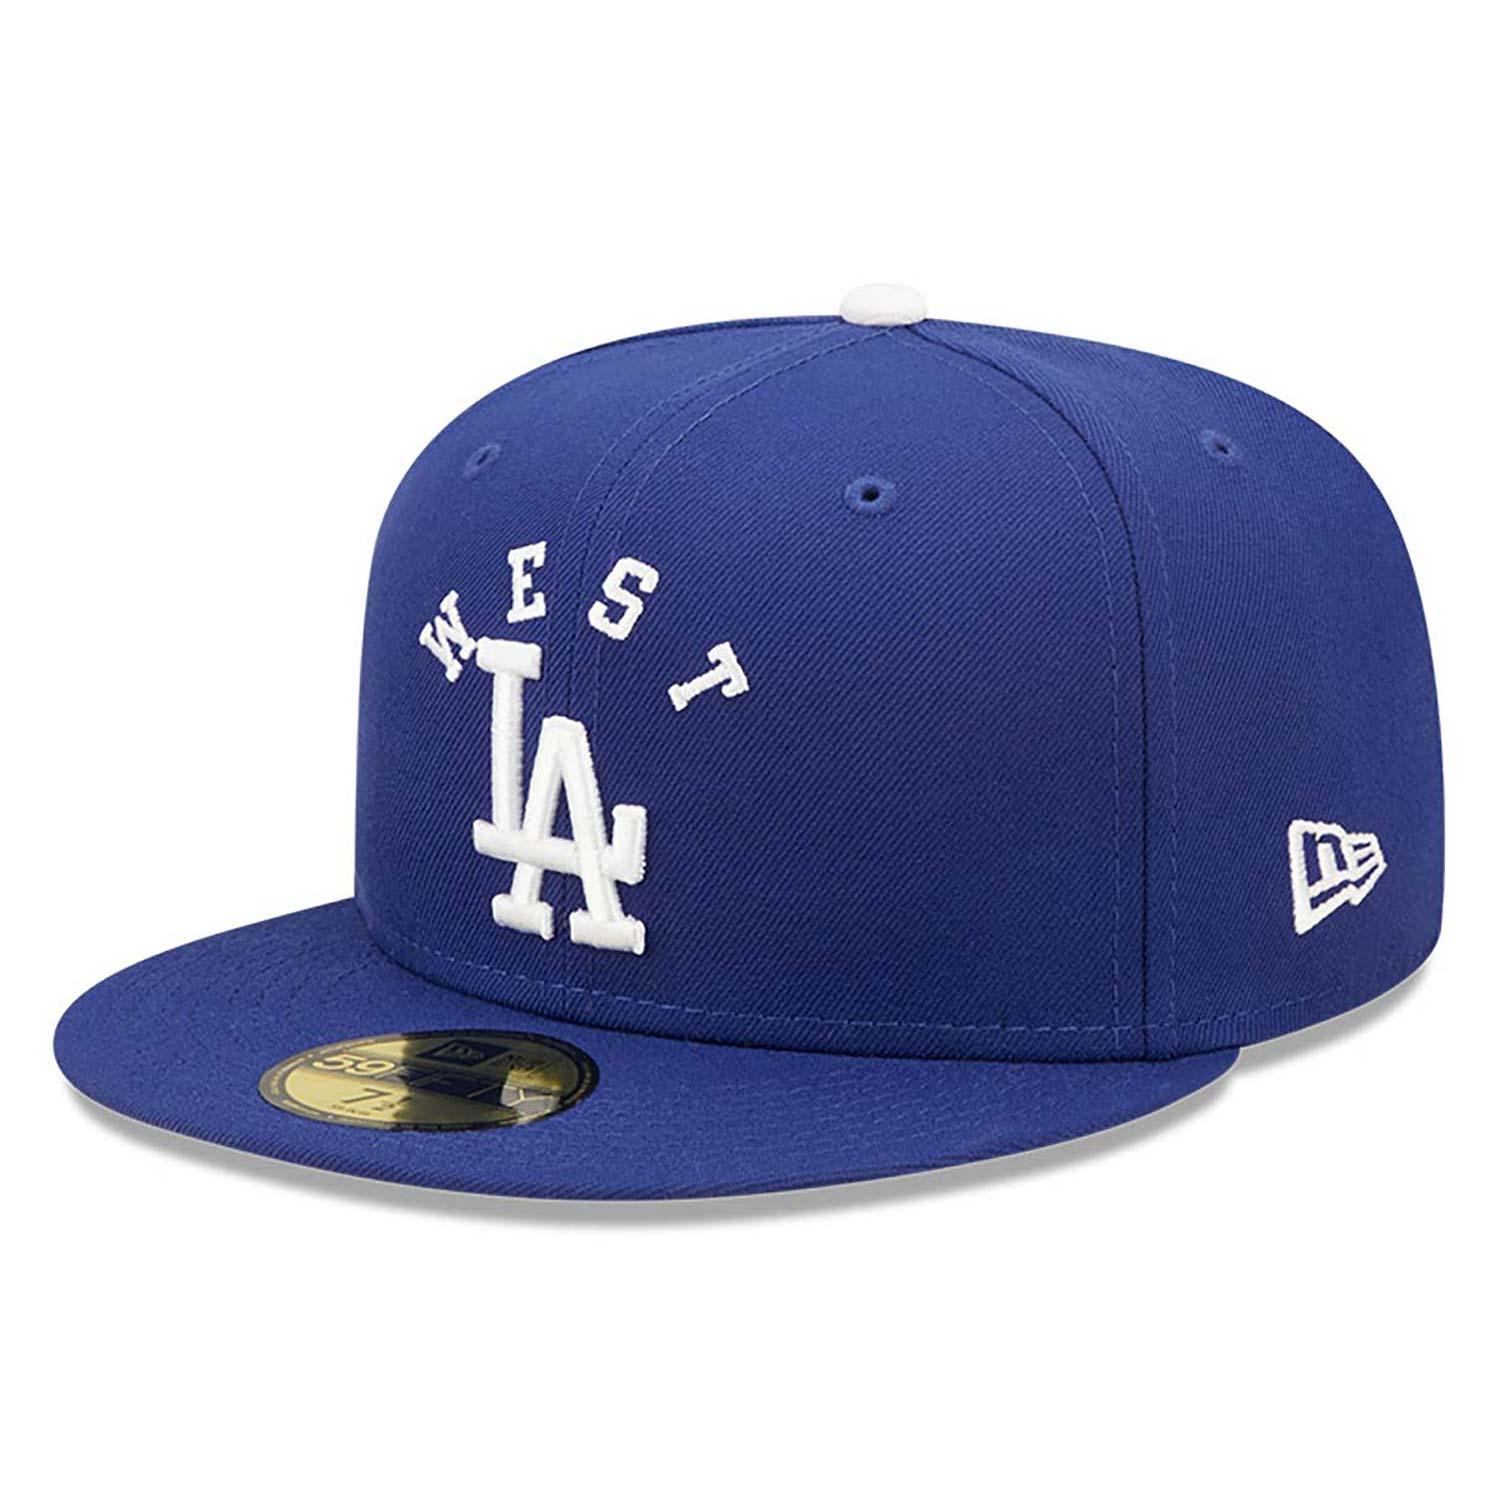 NEW ERA 59FIFTY MLB LEAGUE LOS ANGELES DODGERS TEAM BLUE FITTED CAP - FAM